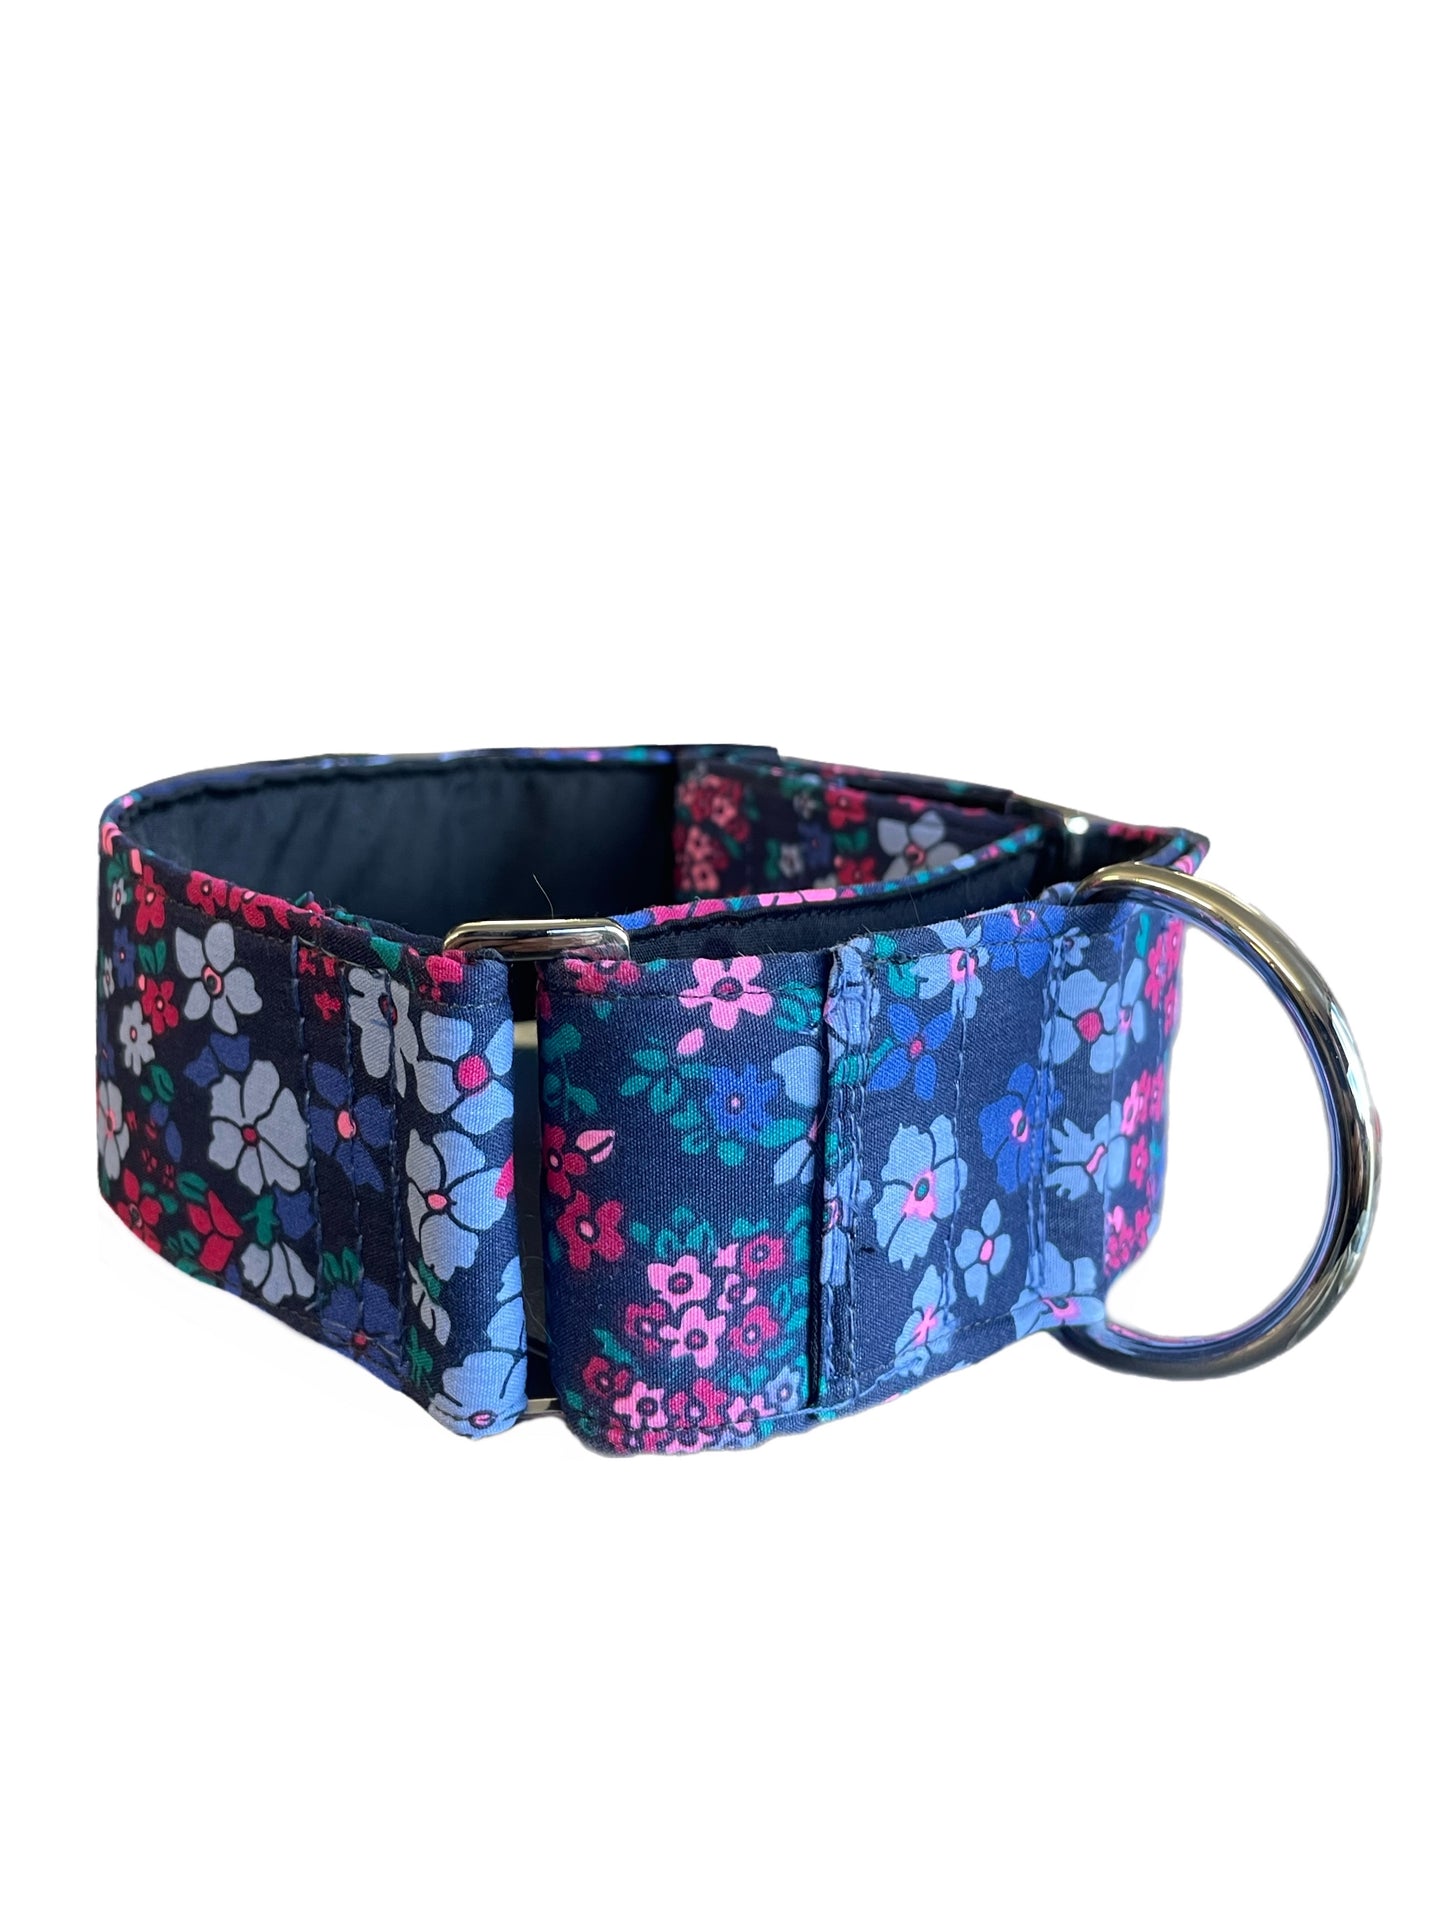 Cotton covered floral print on navy greyhound Martingale collar 50mm width, whippet 38mm